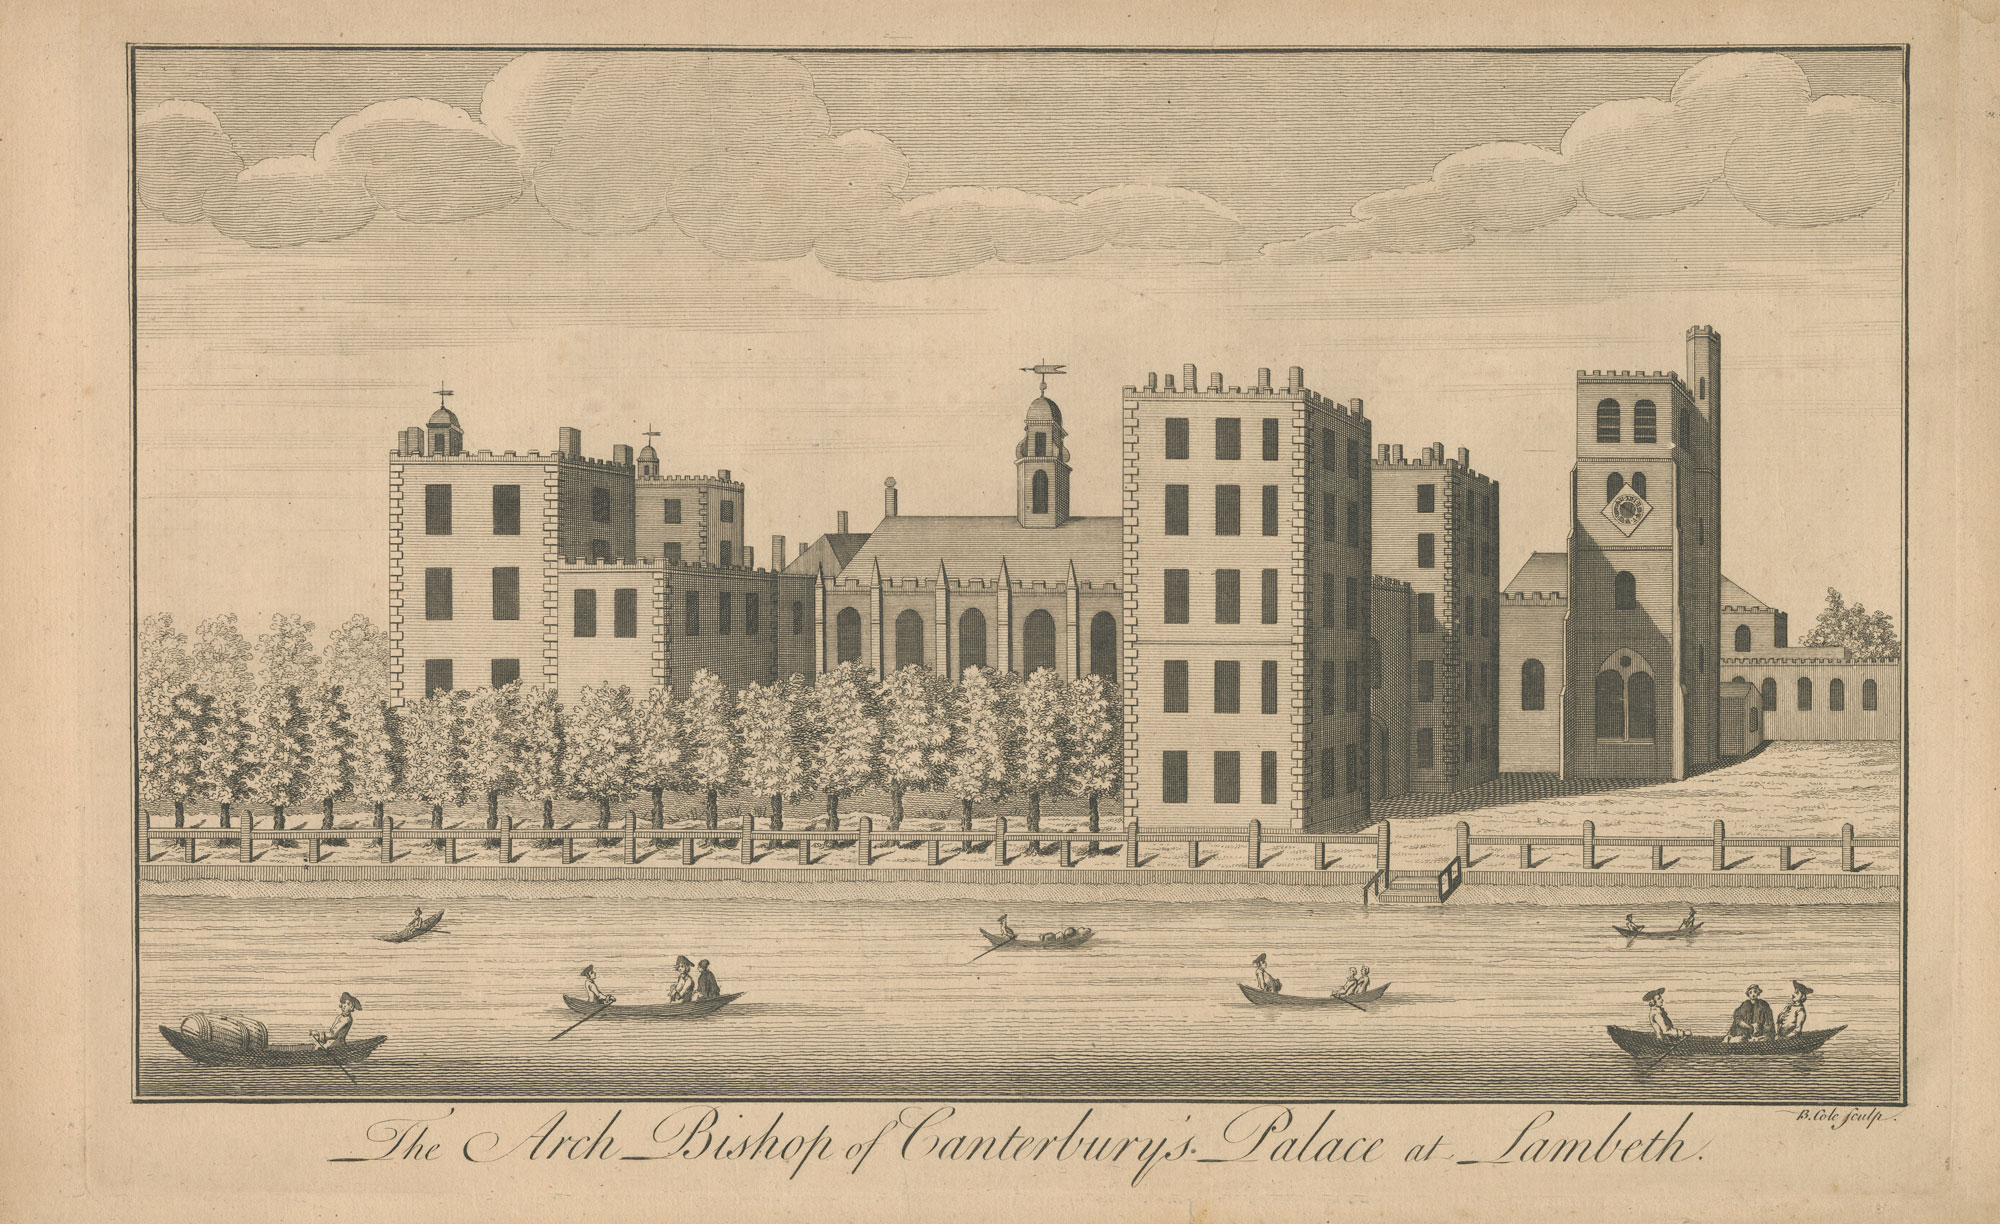 Architectural engraving of the Arch Bishop of Canterbury's Palace at Lambeth